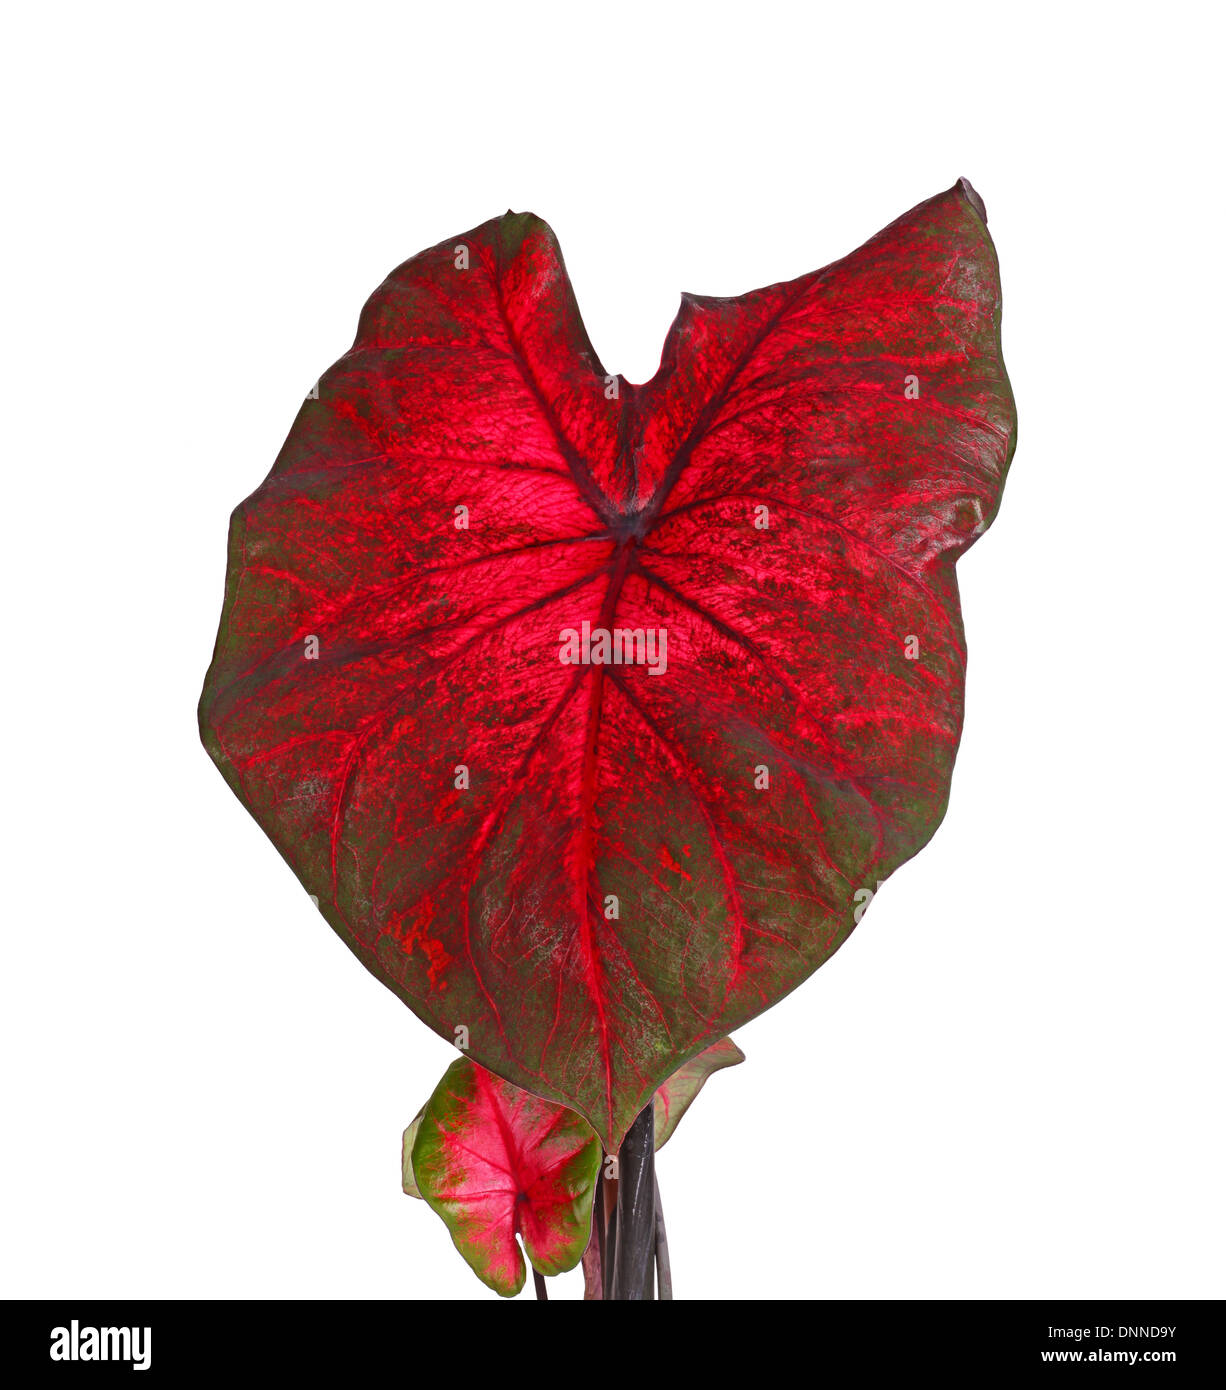 Red and green leaves of a caladium cultivar (Caladium bicolor) isolated against a white background Stock Photo